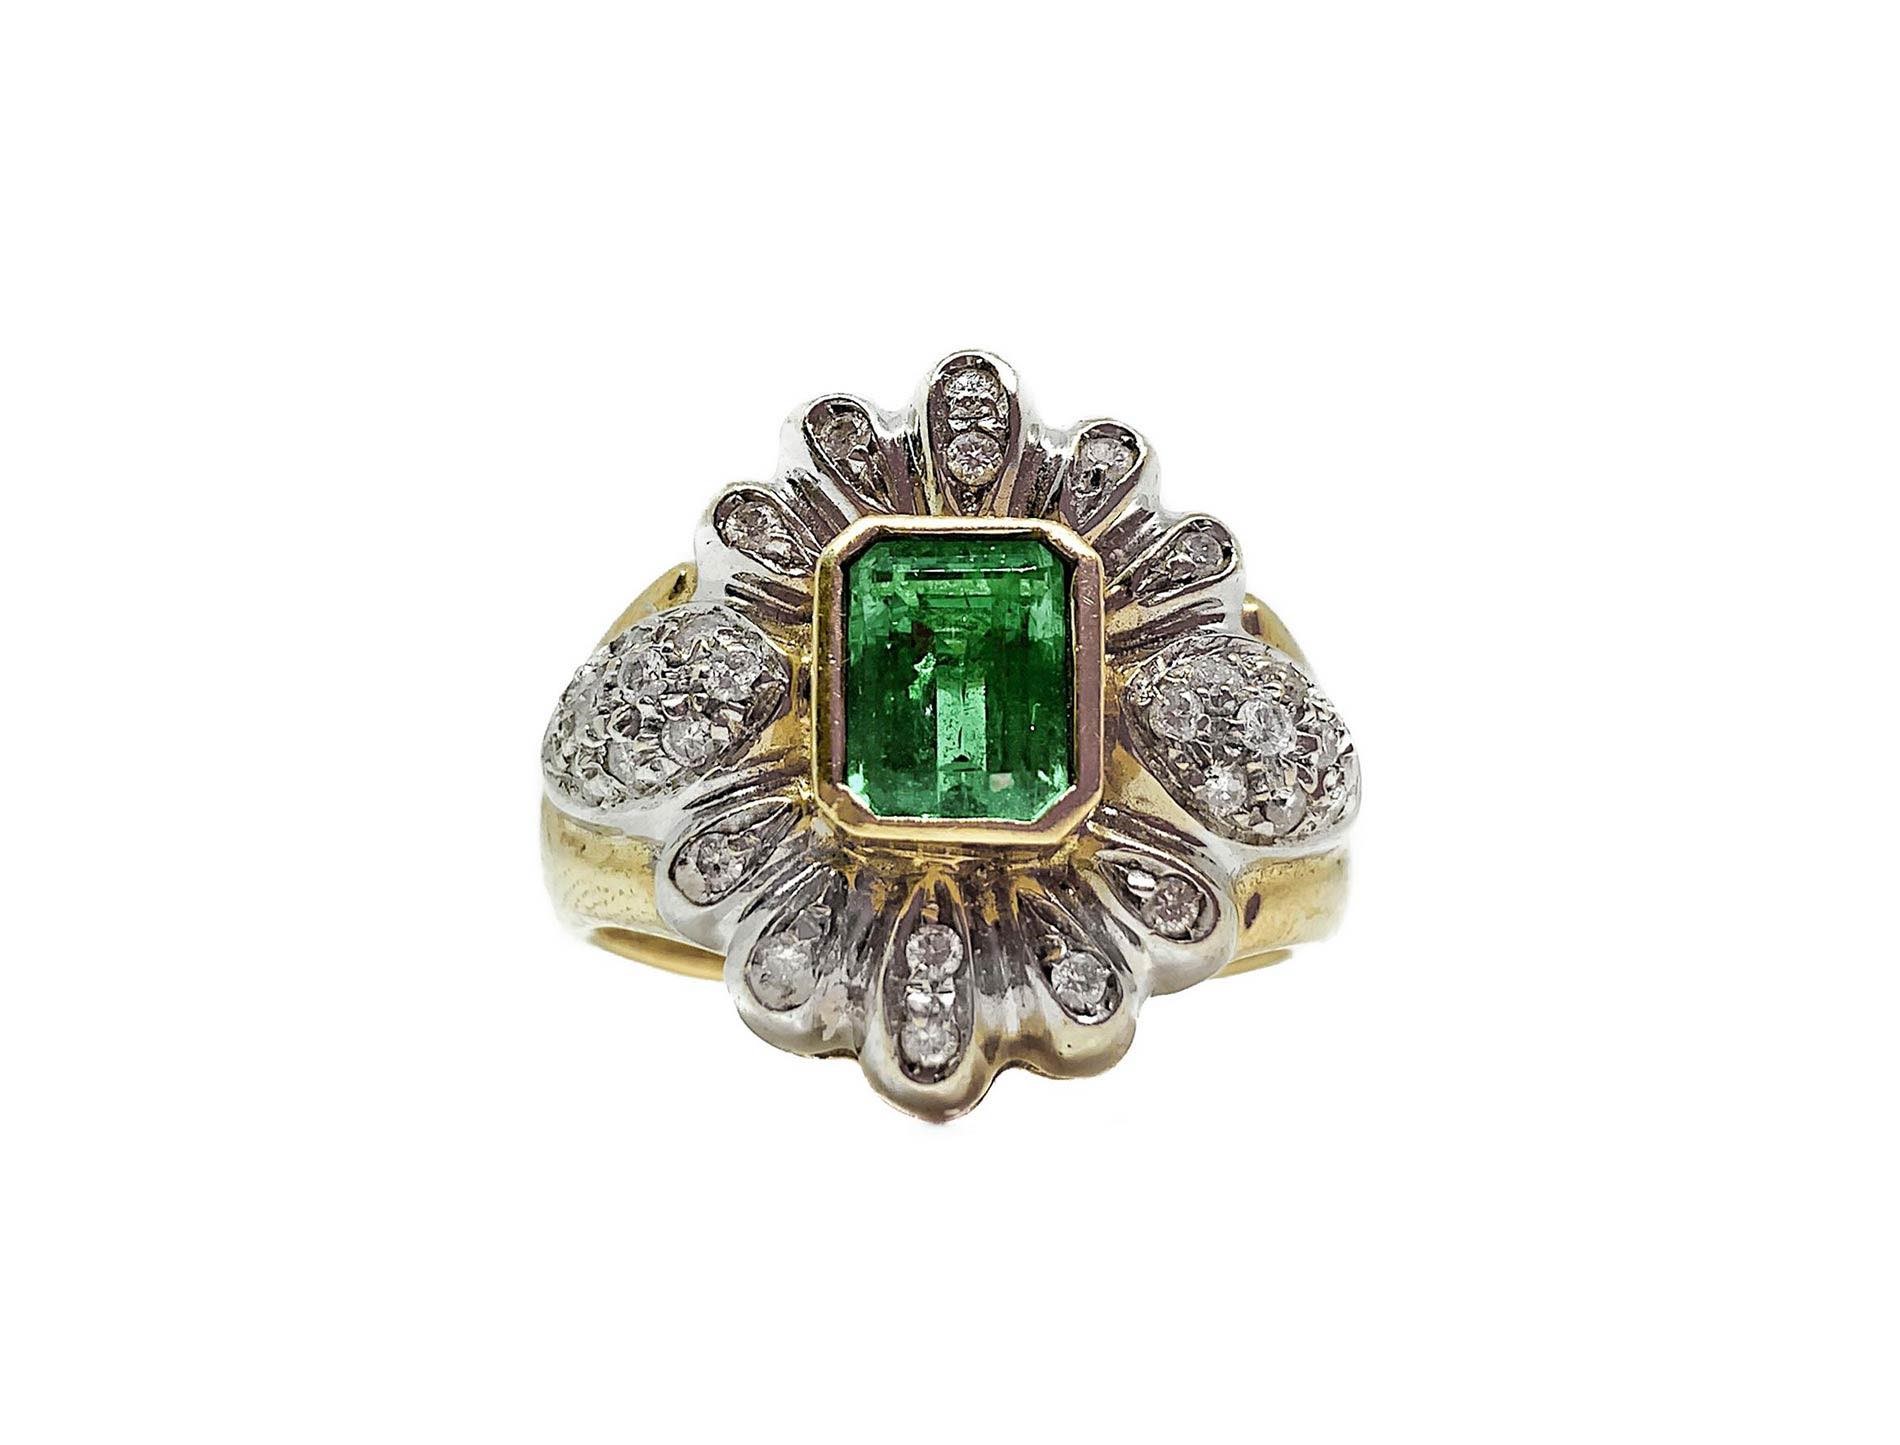 Ring in yellow gold, diamonds and emeralds - Image 2 of 6